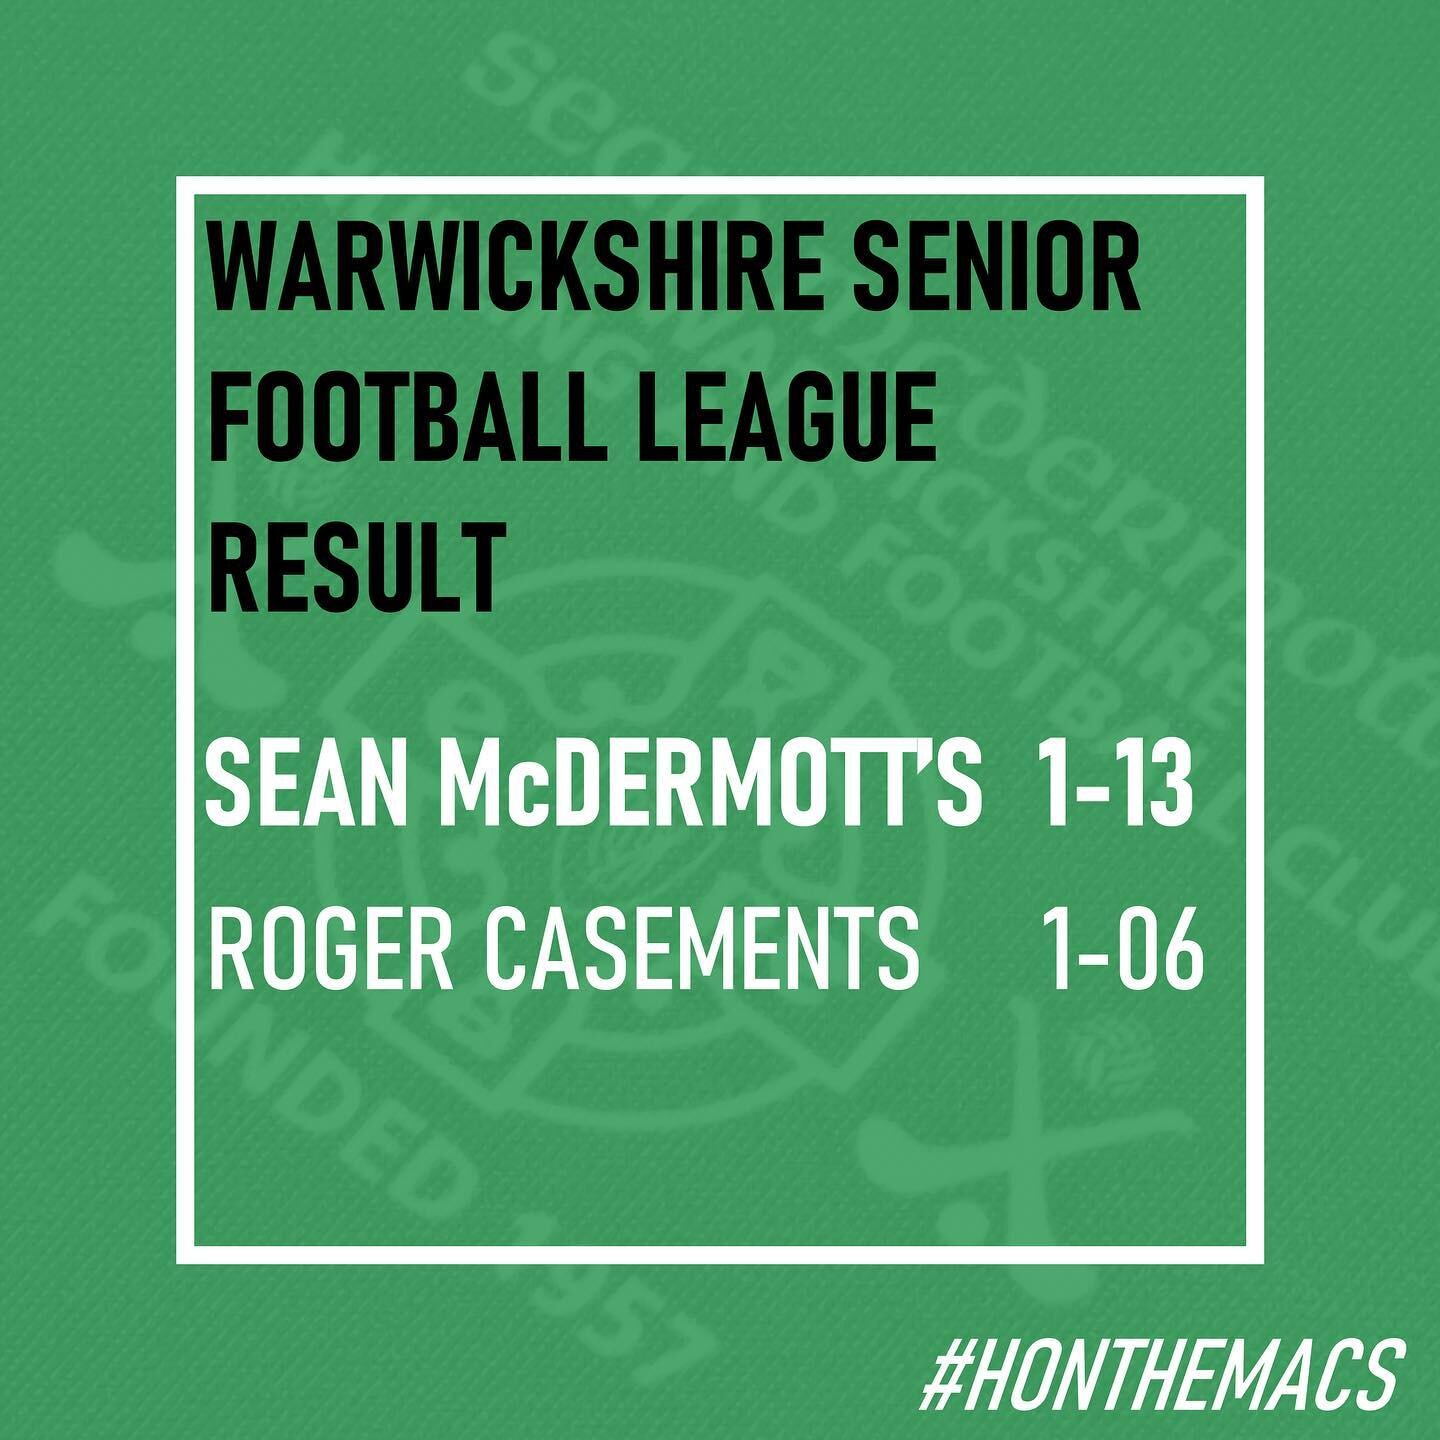 Victory for our seniors this evening.

#honthemacs